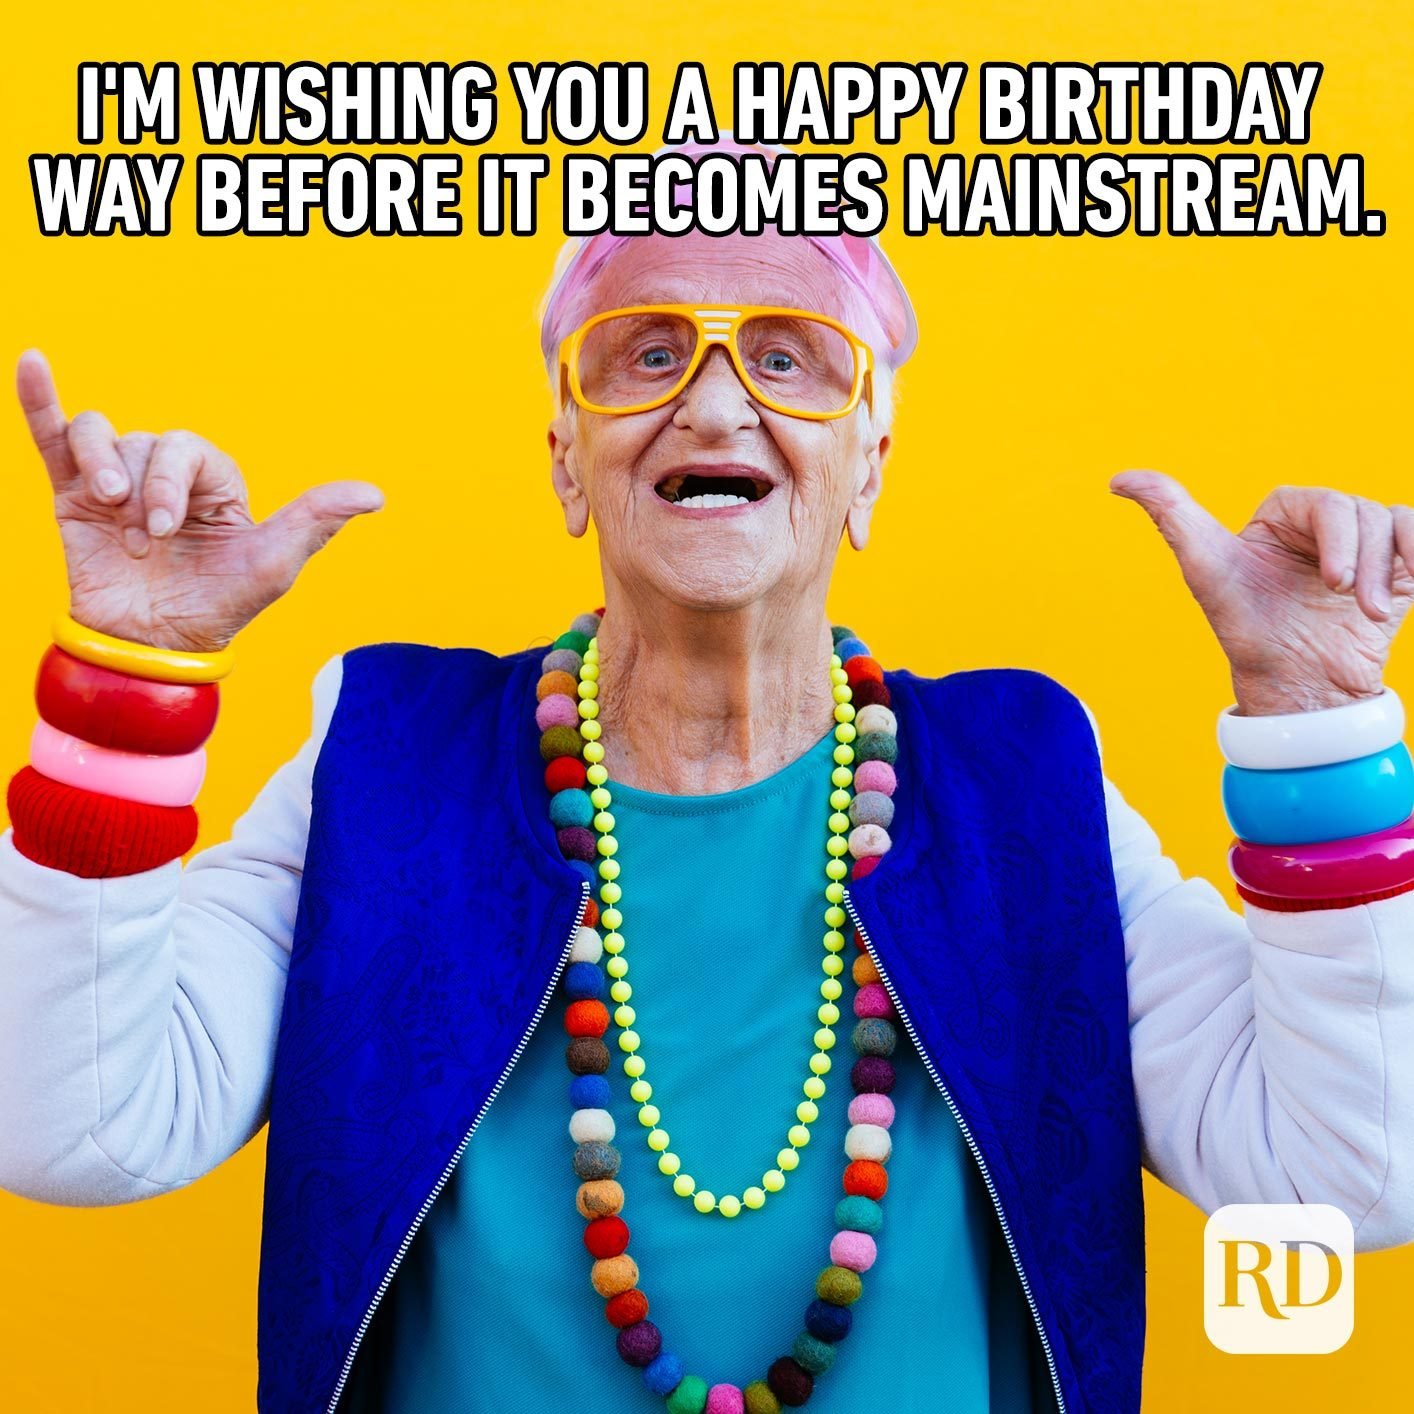 I'm wishing you a happy birthday way before it becomes mainstream.